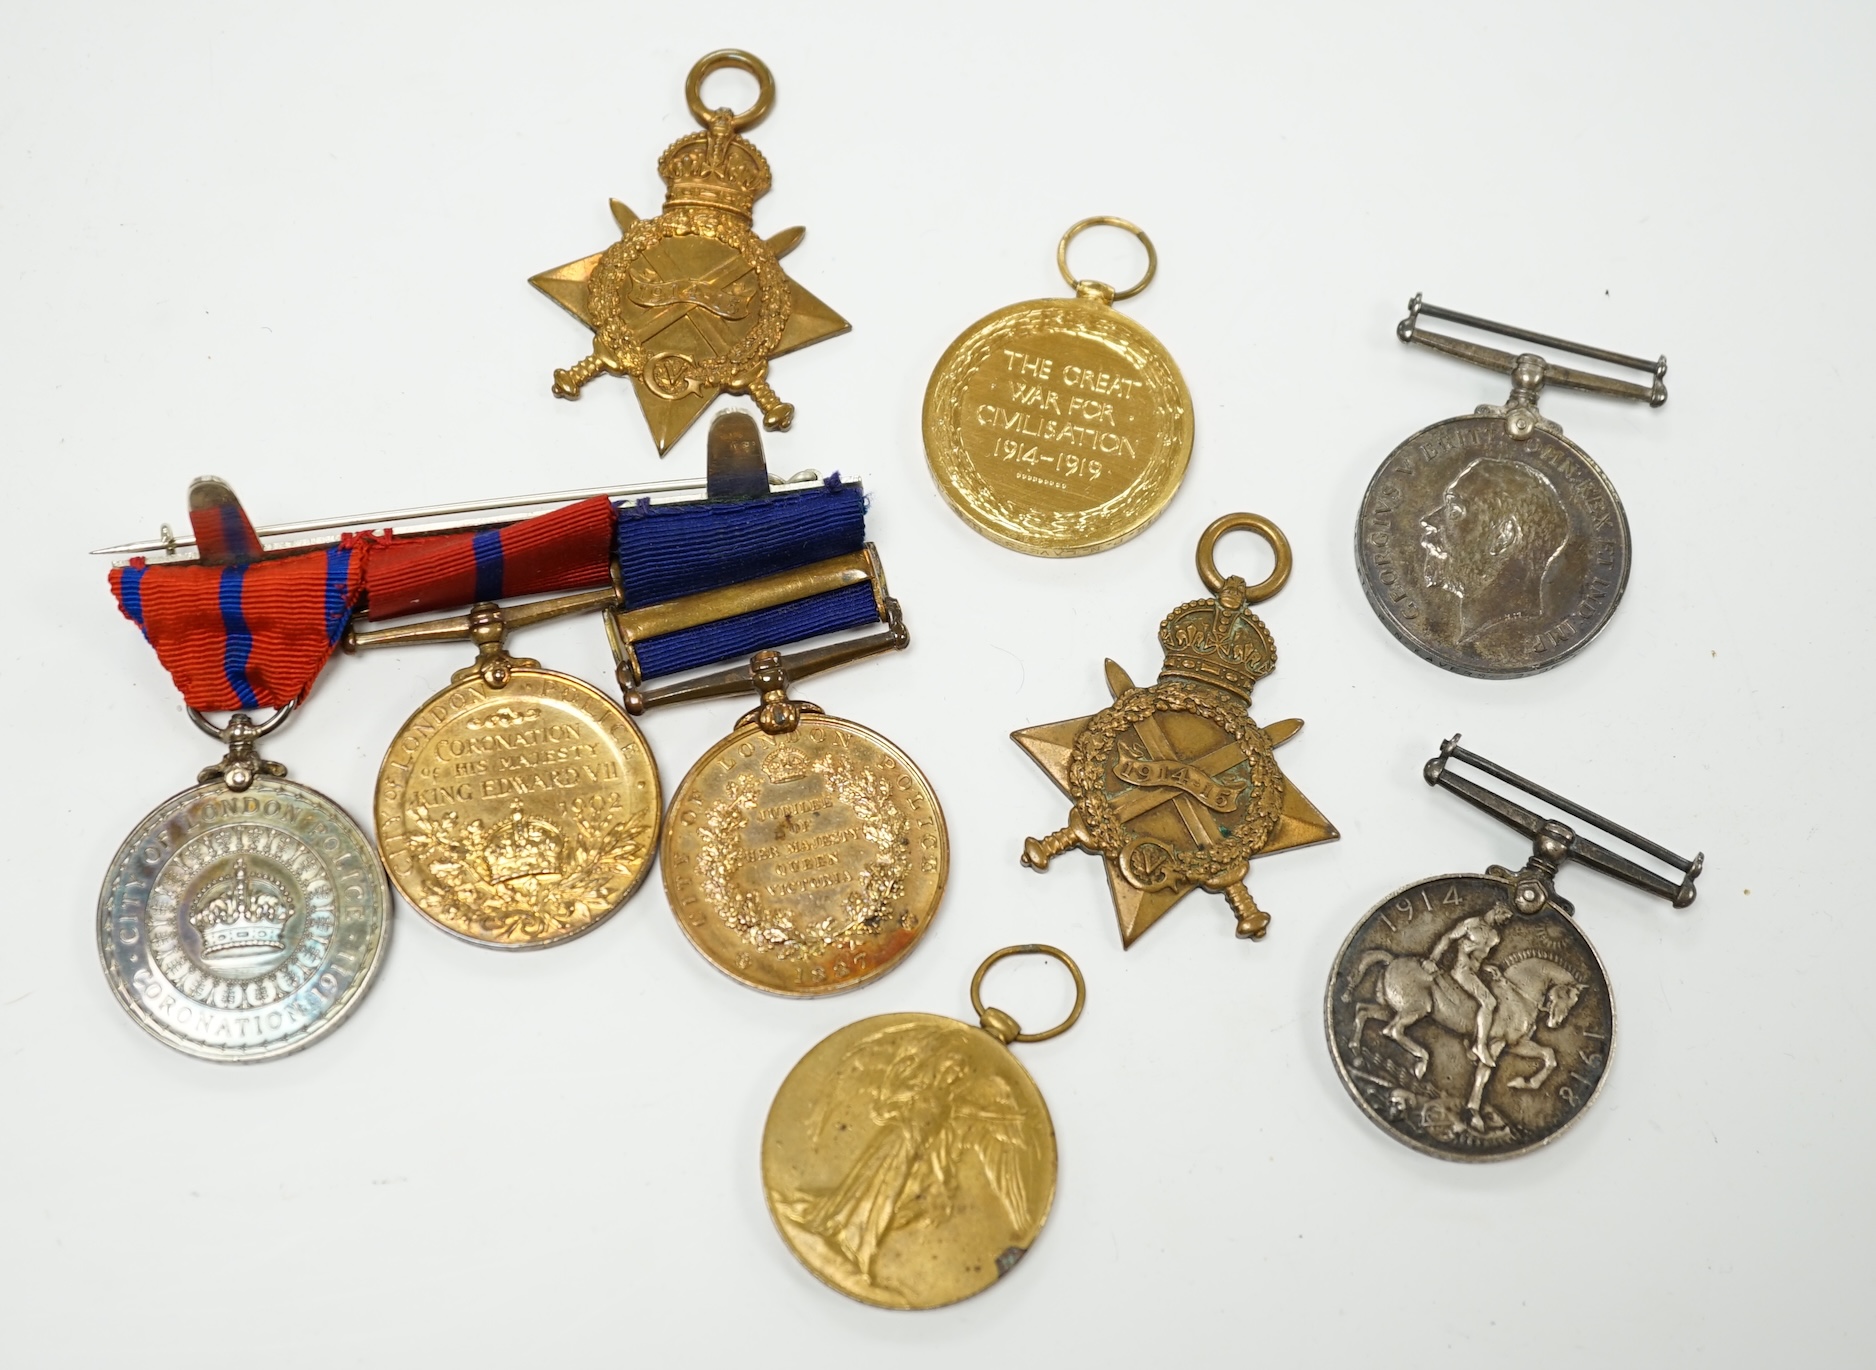 Two First World War medal groups; a group awarded to Private P.N. Lavers, City of London Yeomanry